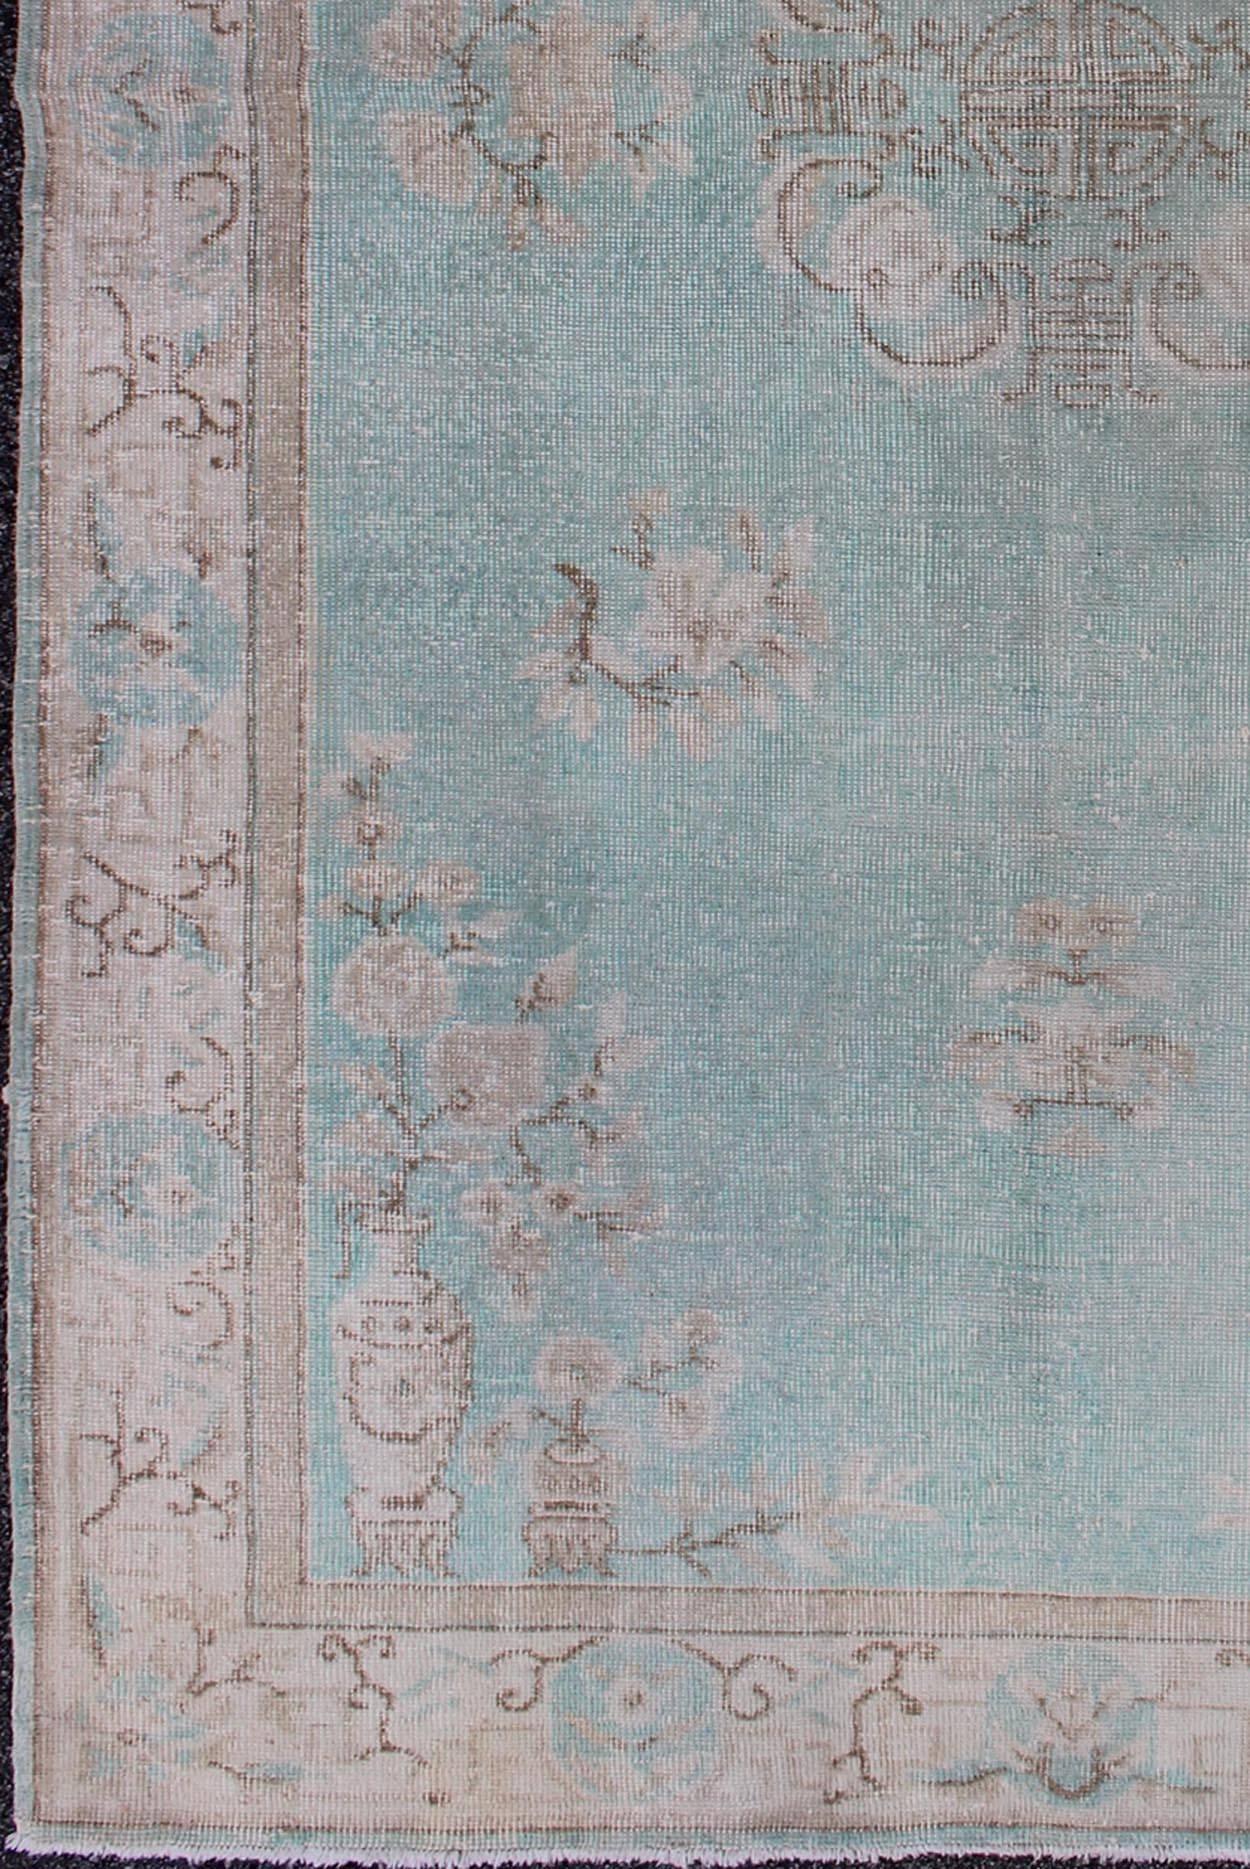 Vintage Turkish Rug with Khotan Design in Sea Foam Blue, Taupe and Light Brown. Rug/EN-140242.

Inspired by Asian motifs and Western Chinese designs of 18th and 19th century, this unique Turkish carpet displays a unique color combination with light